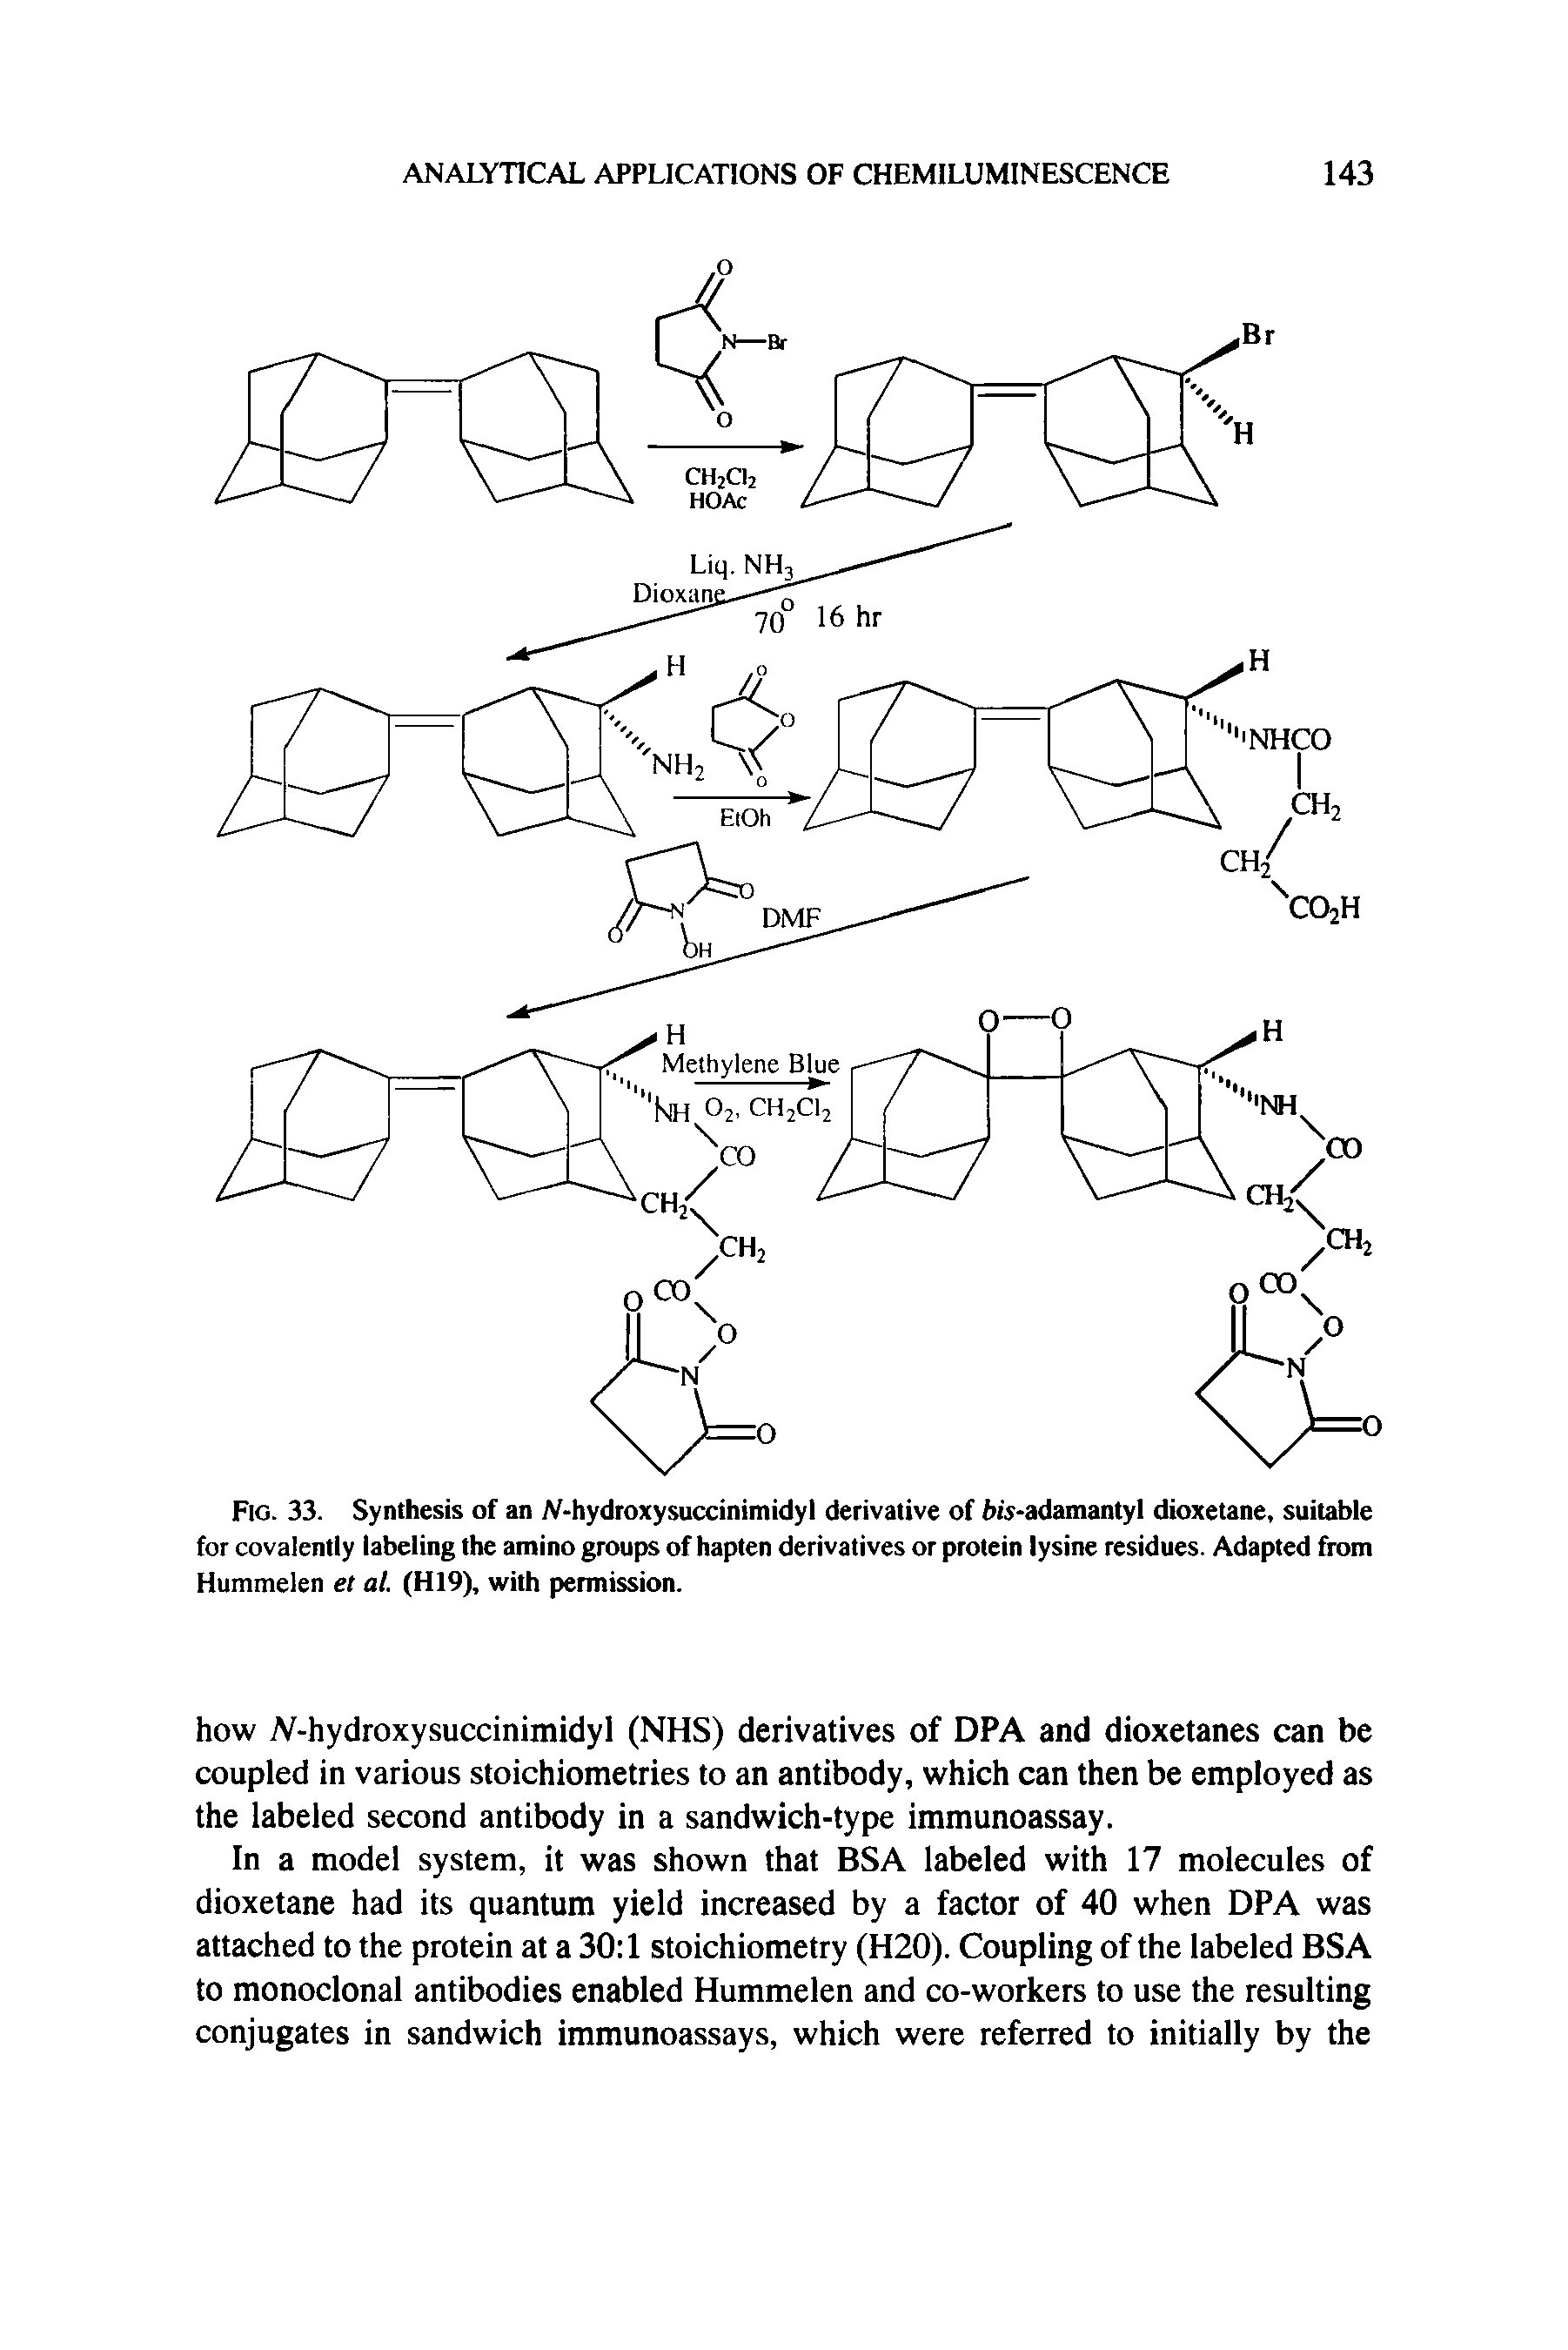 Fig. 33. Synthesis of an N-hydroxysuccinimidyl derivative of his-adamantyl dioxetane, suitable tor covalently labeling the amino groups of hapten derivatives or protein lysine residues. Adapted from Hummelen et al. (H19), with permission.